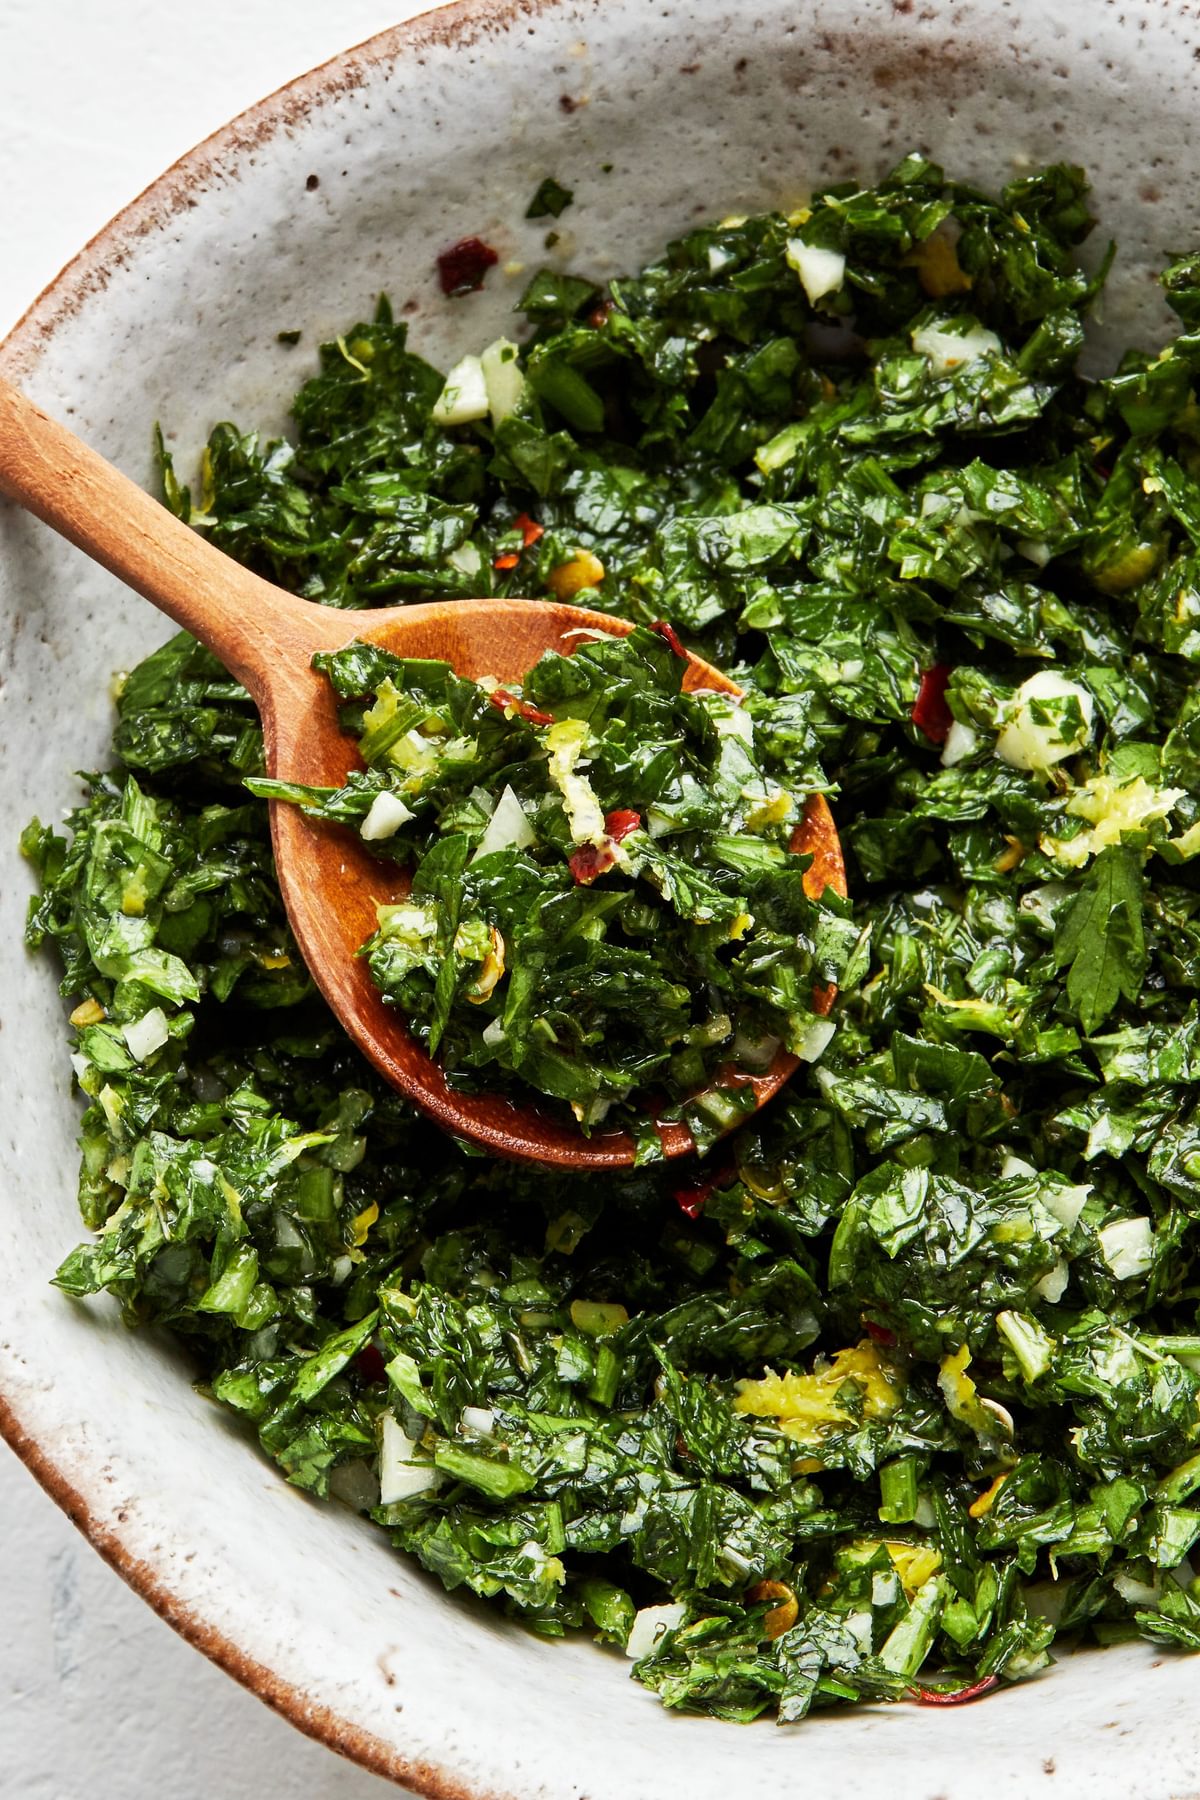 homemade gremolata in a serving bowl with a wooden spoon